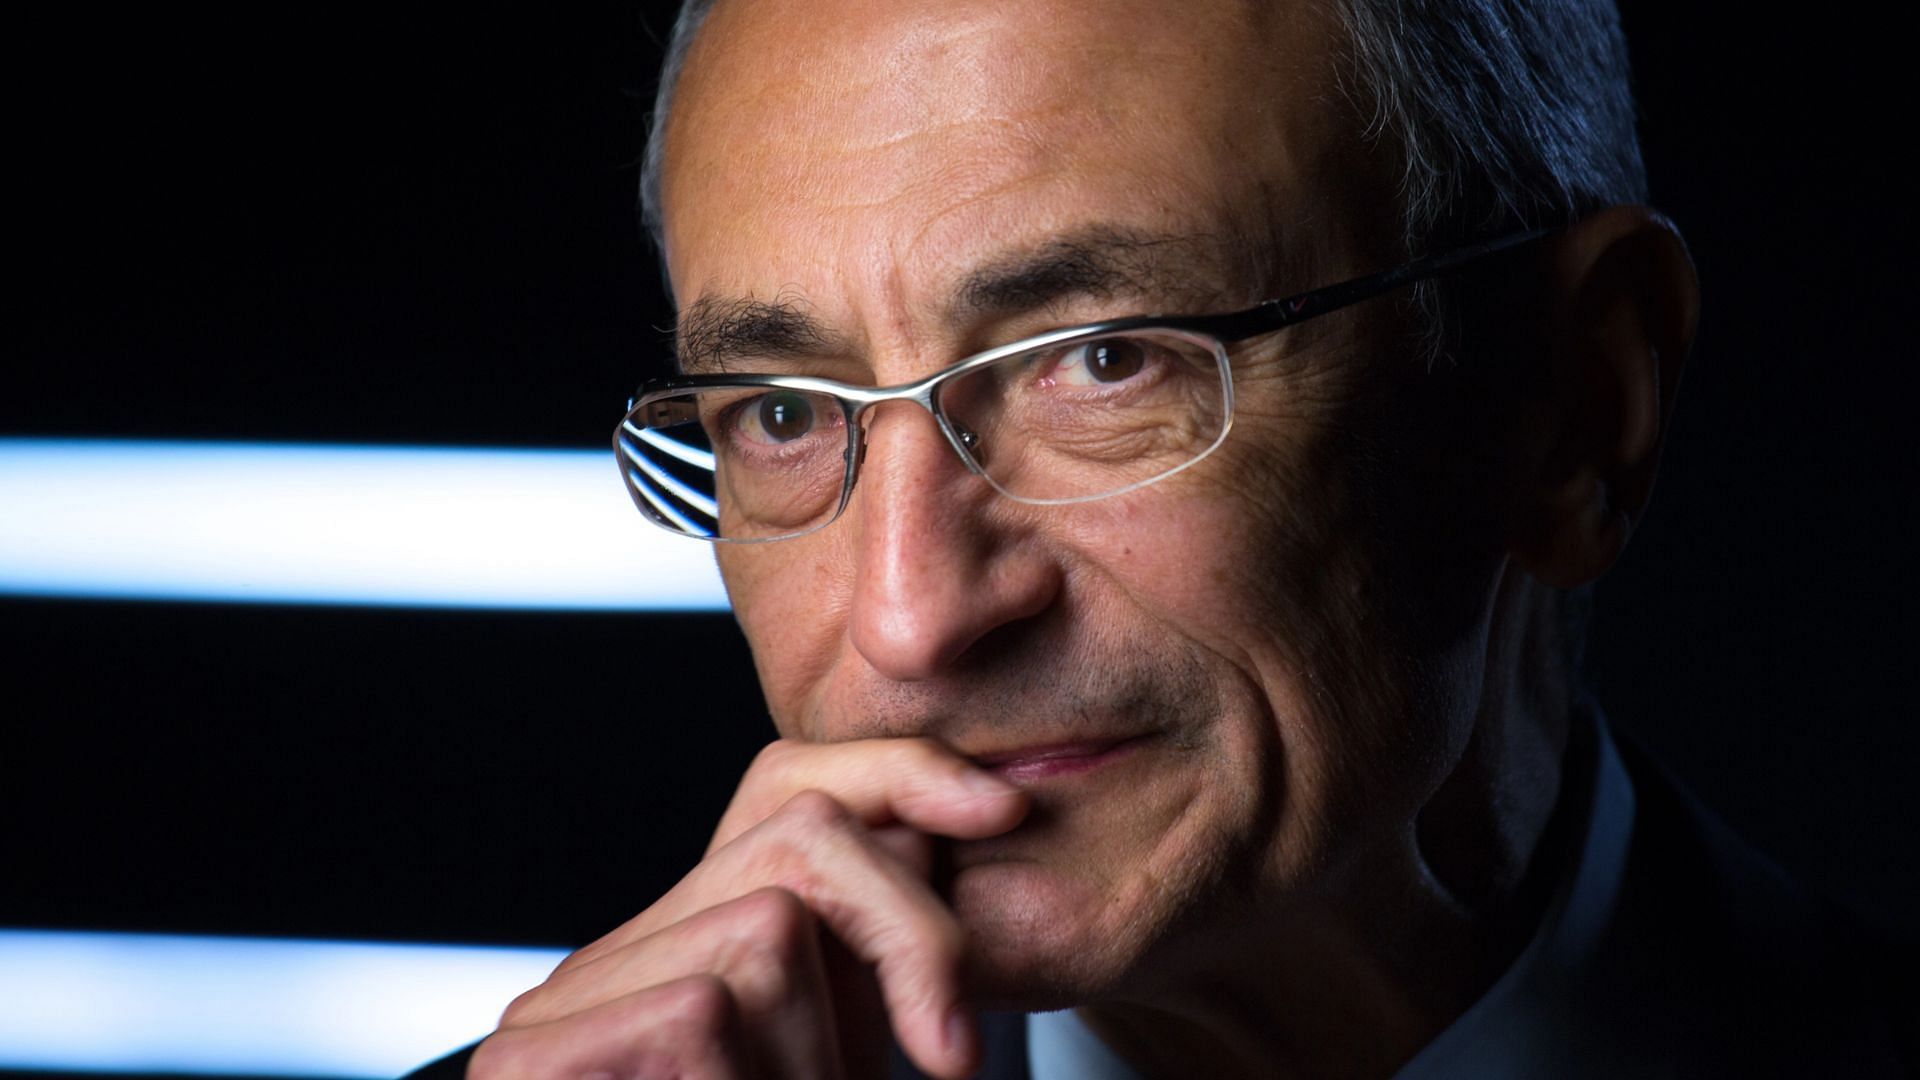 John Podesta is being roped into the Balenciaga scandal (image via Getty/David Hume Kennerly)